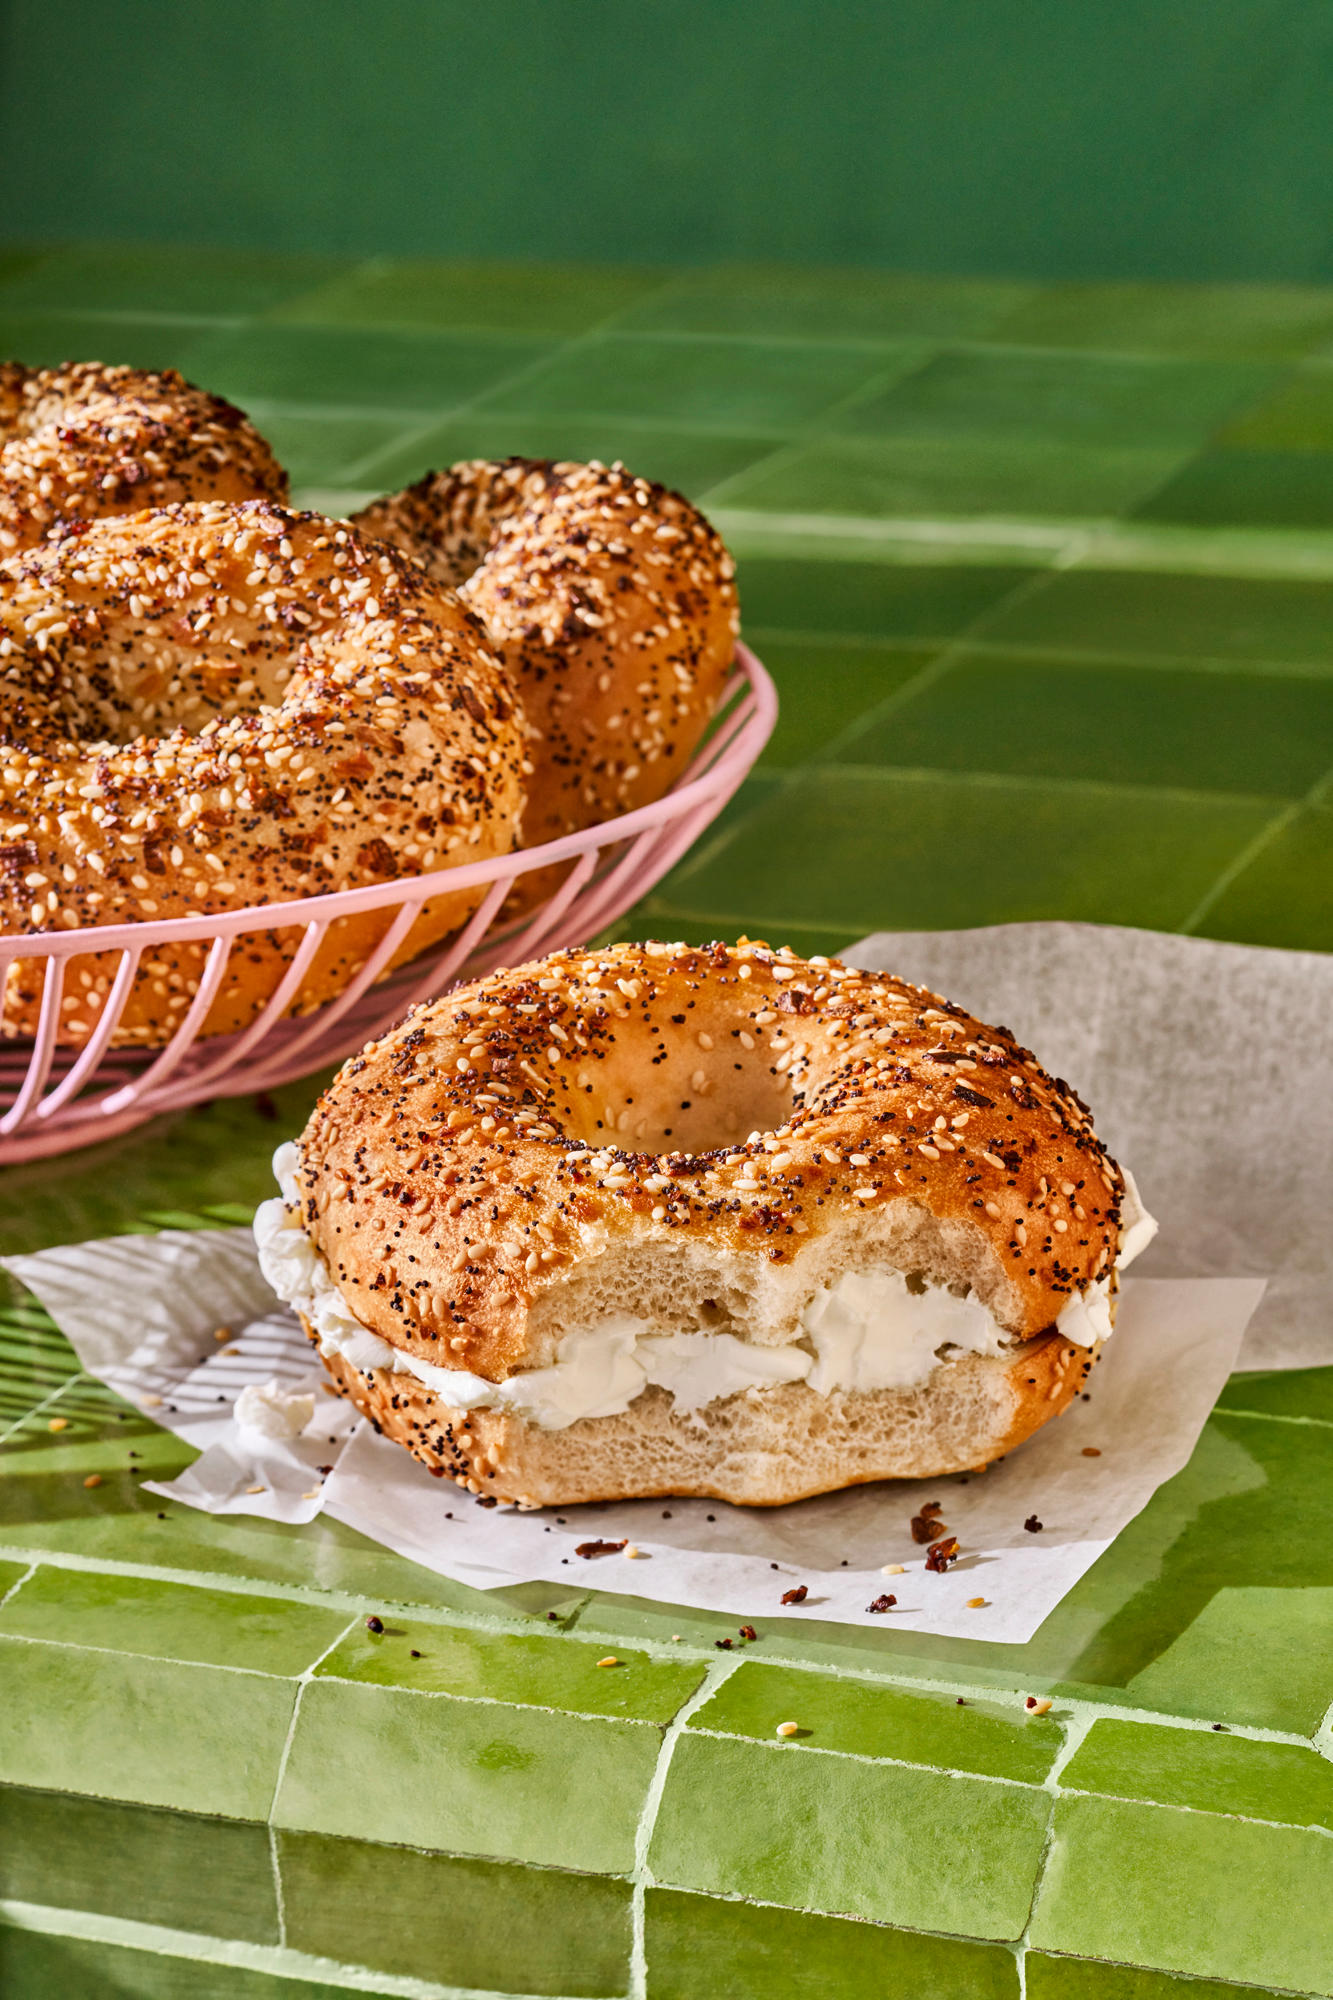 Everything Bagel with Plain Cream Cheese Panera Bread Port St Lucie (772)237-8088